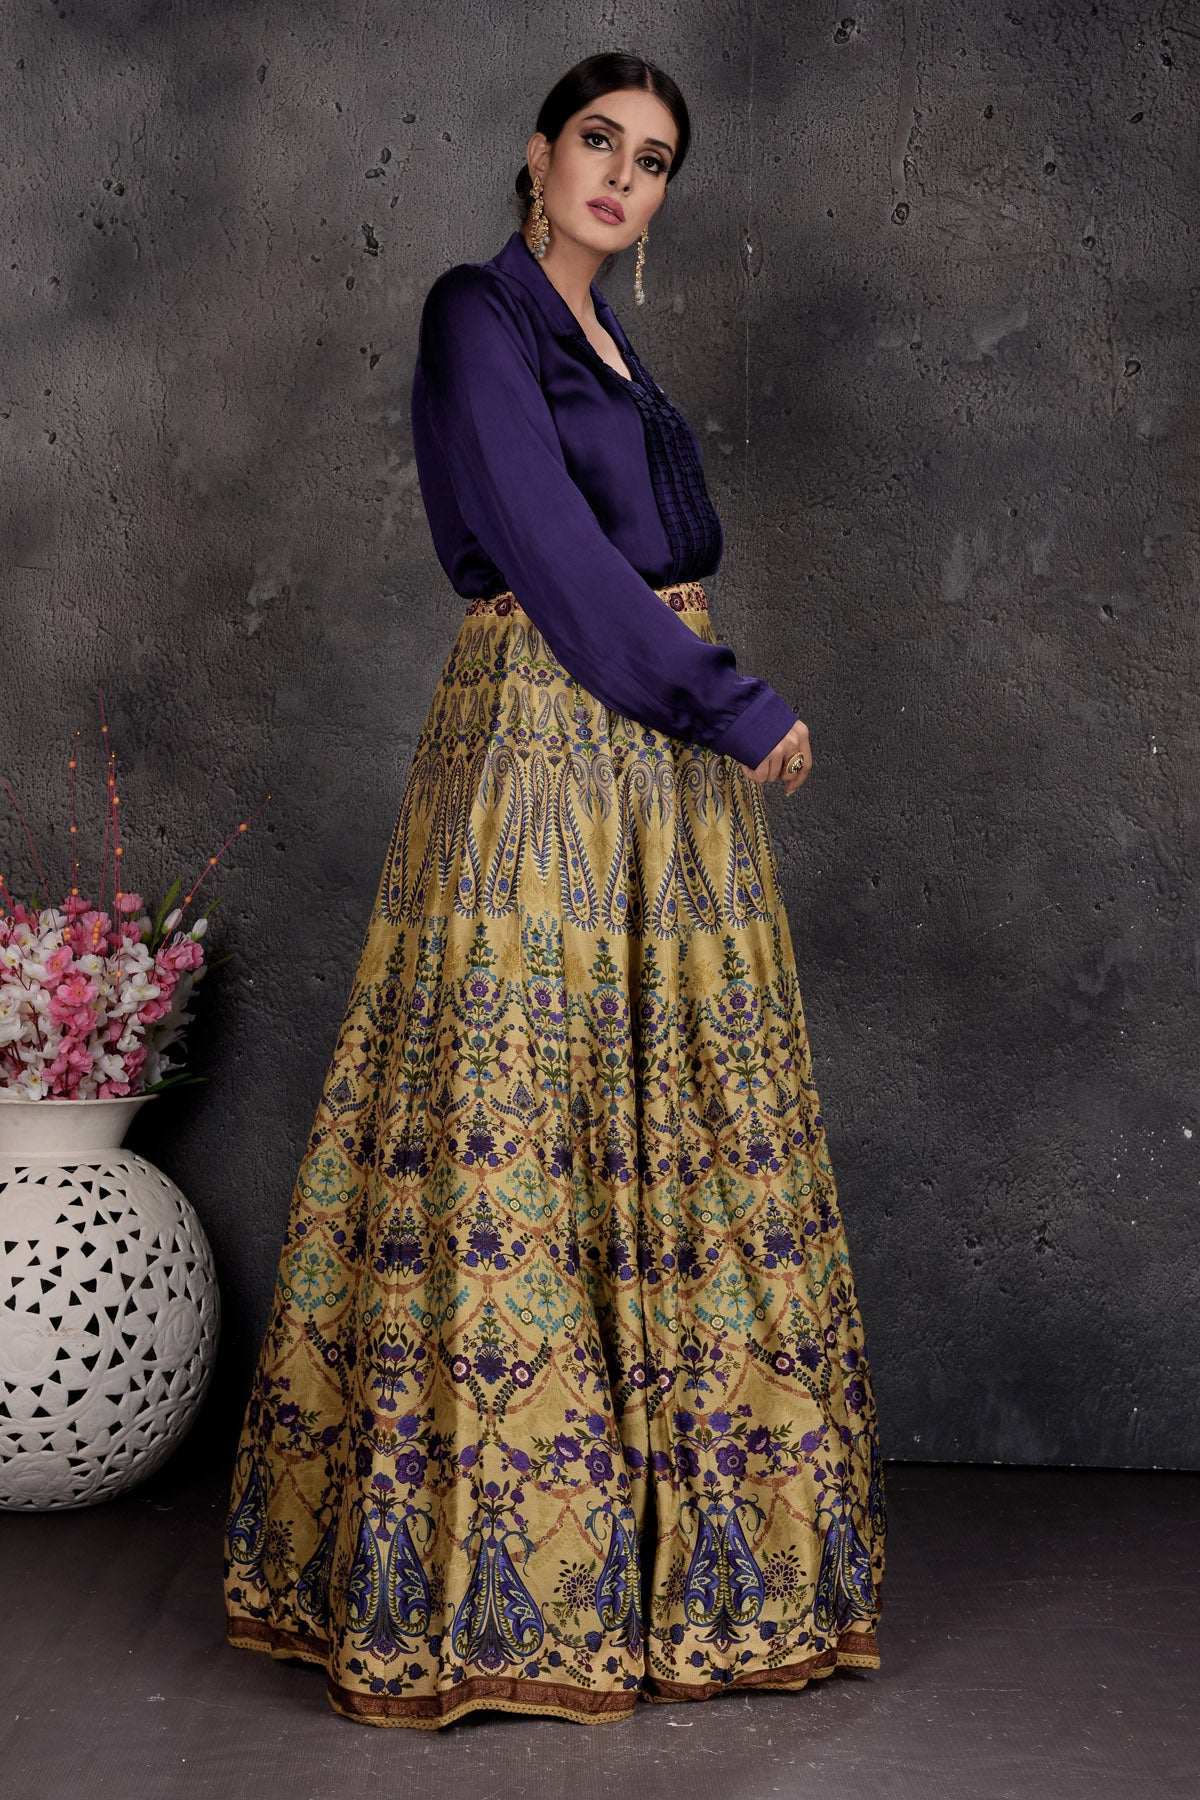 Heavy Skirts & Western Blouses: We Are Loving This New Trend! | Velvet  dress designs, Indian outfits lehenga, Diwali outfits